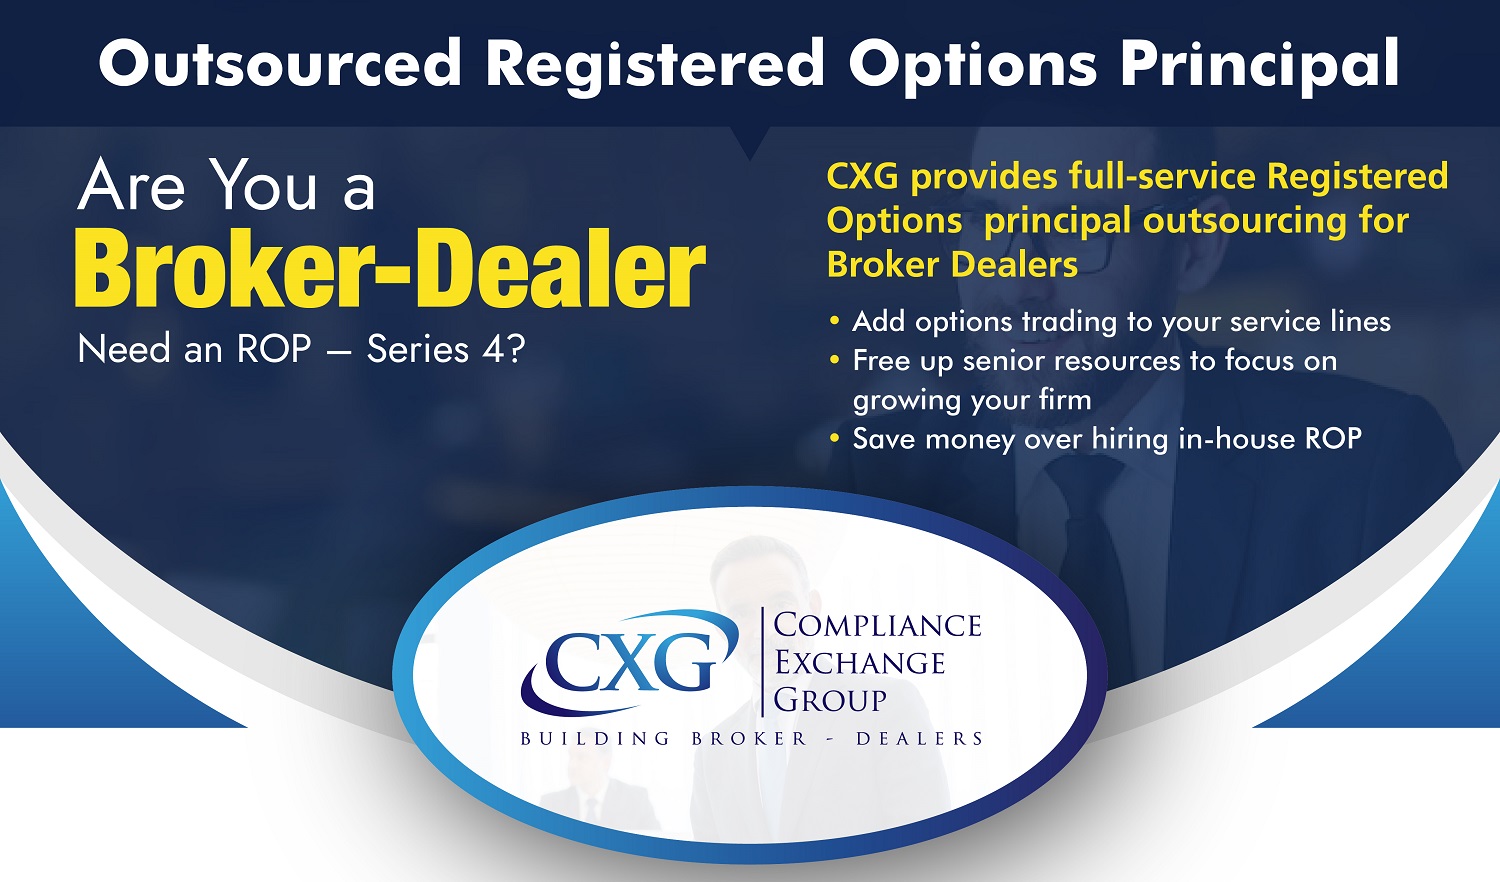 Outsourced Registered Options Principal | Compliance Exchange Group